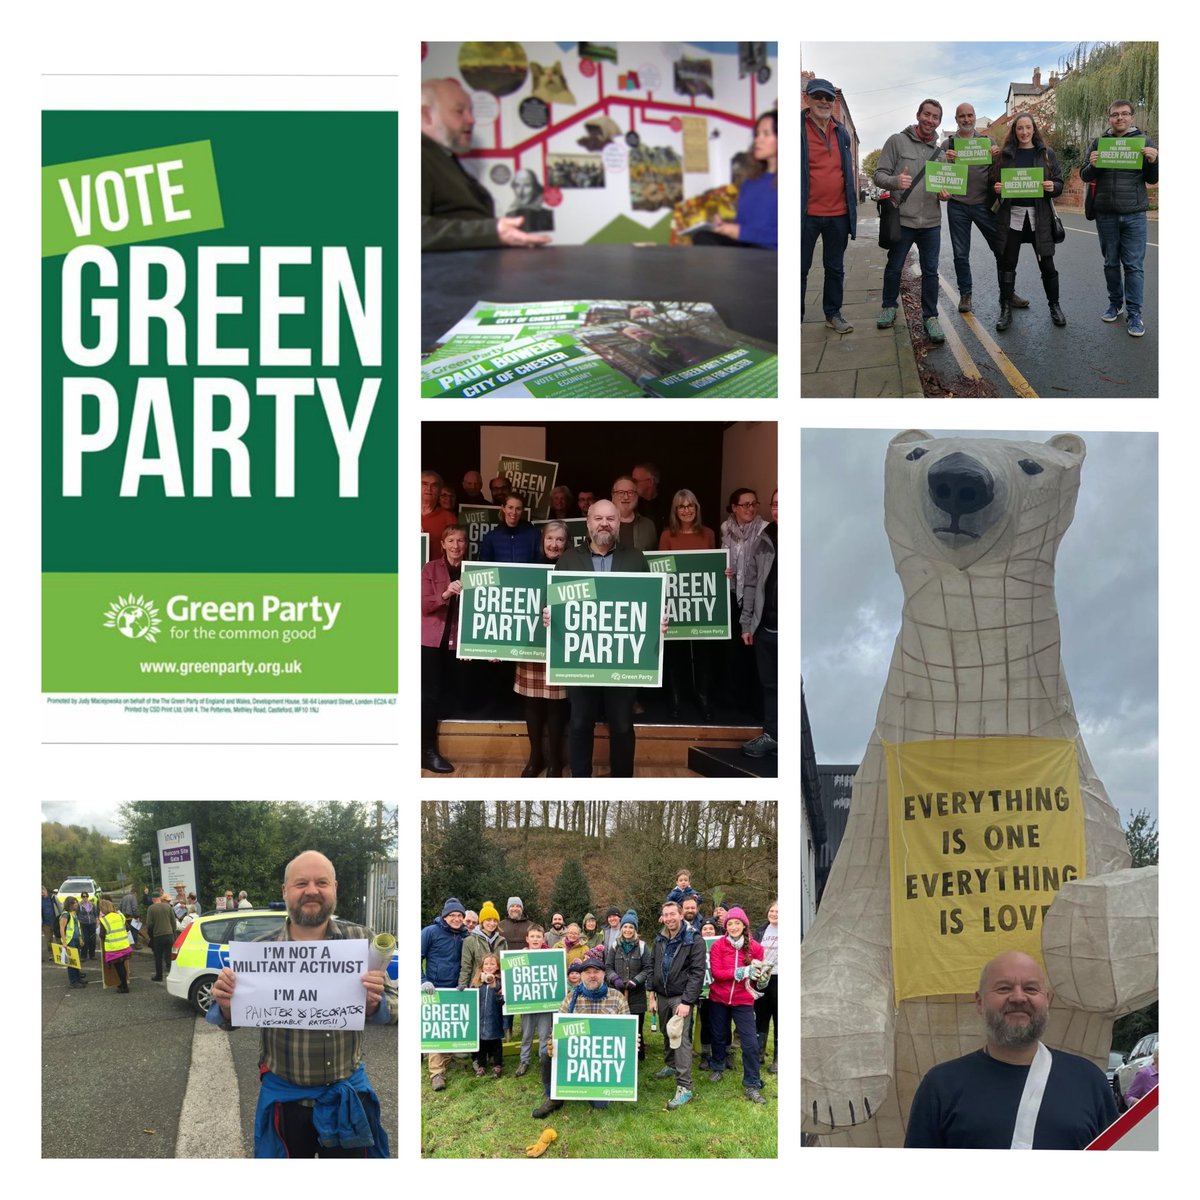 Today is the day!
VOTE for Social Justice not political elitism ✊
VOTE for Environmental Protection not continued greenwashing 💚
VOTE for wealth tax not cost of living crisis 🤑
VOTE for a better way not crushed by Brexit 🇪🇺
VOTE for PAUL BOWERS today #chesterbyelection